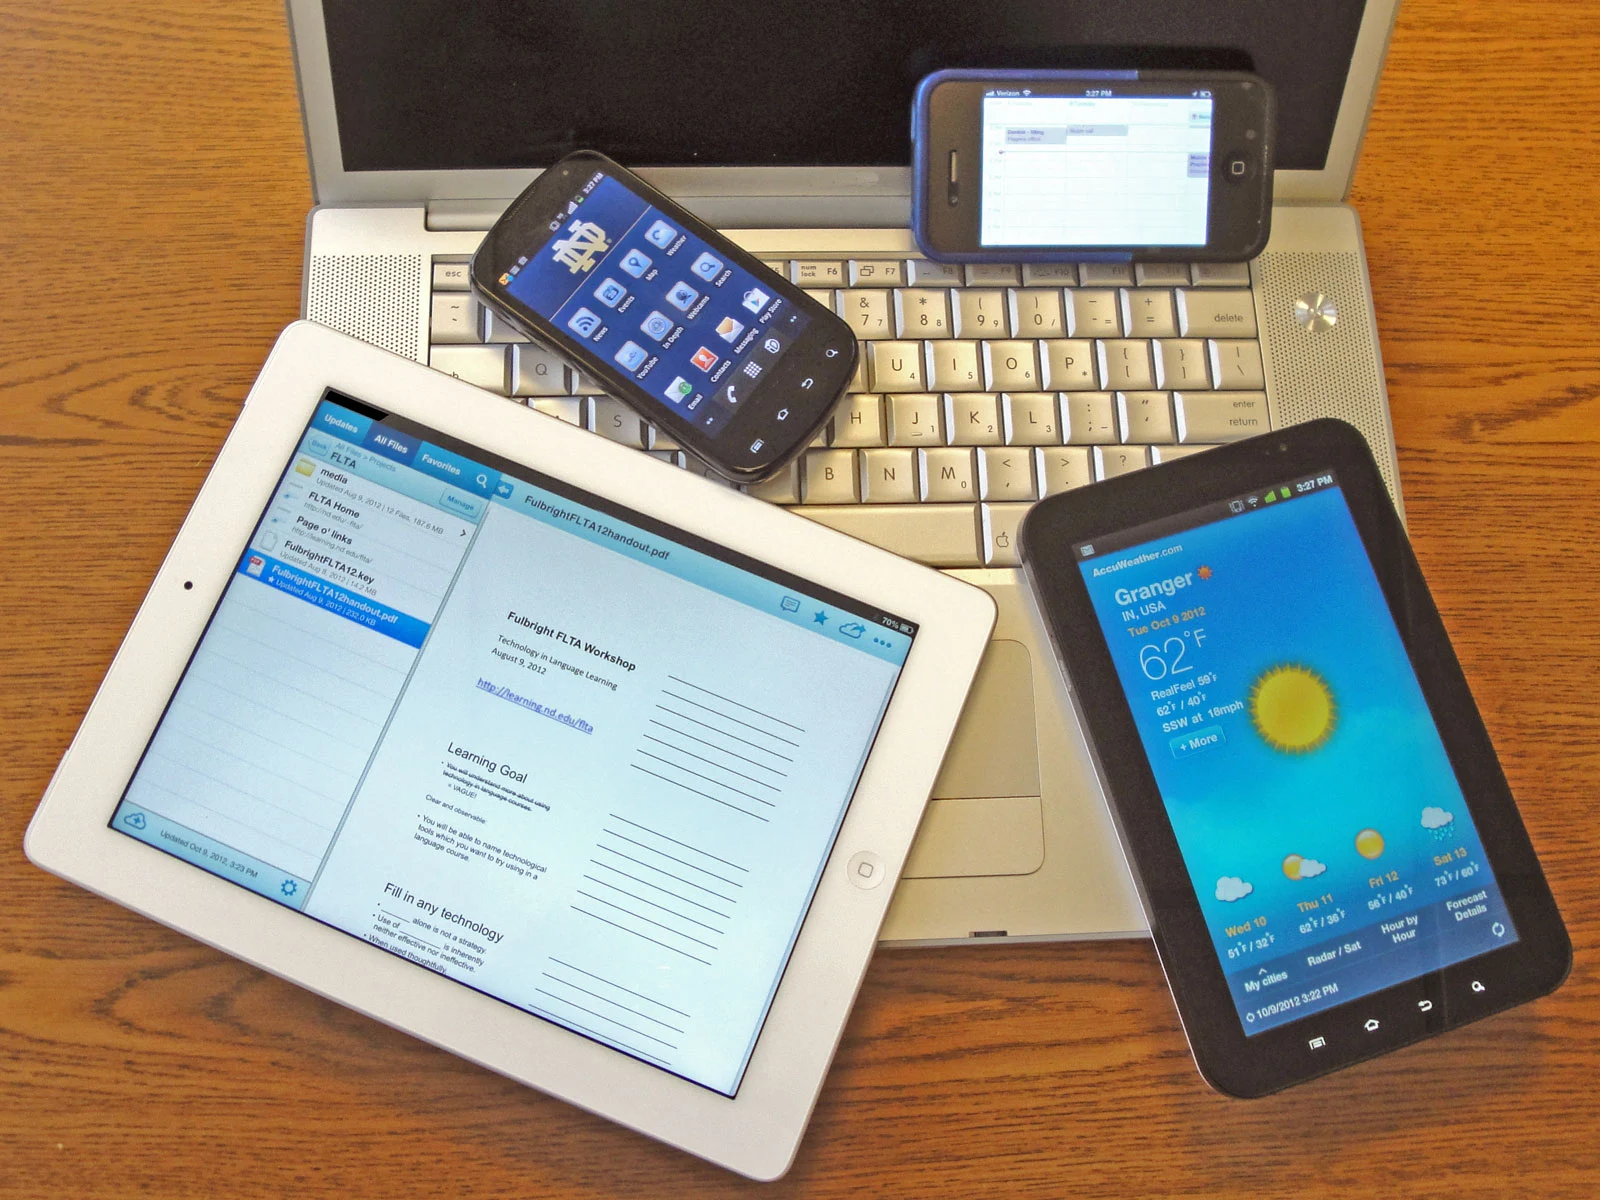 2014 will be the year enterprise goes mobile - BYOD boom